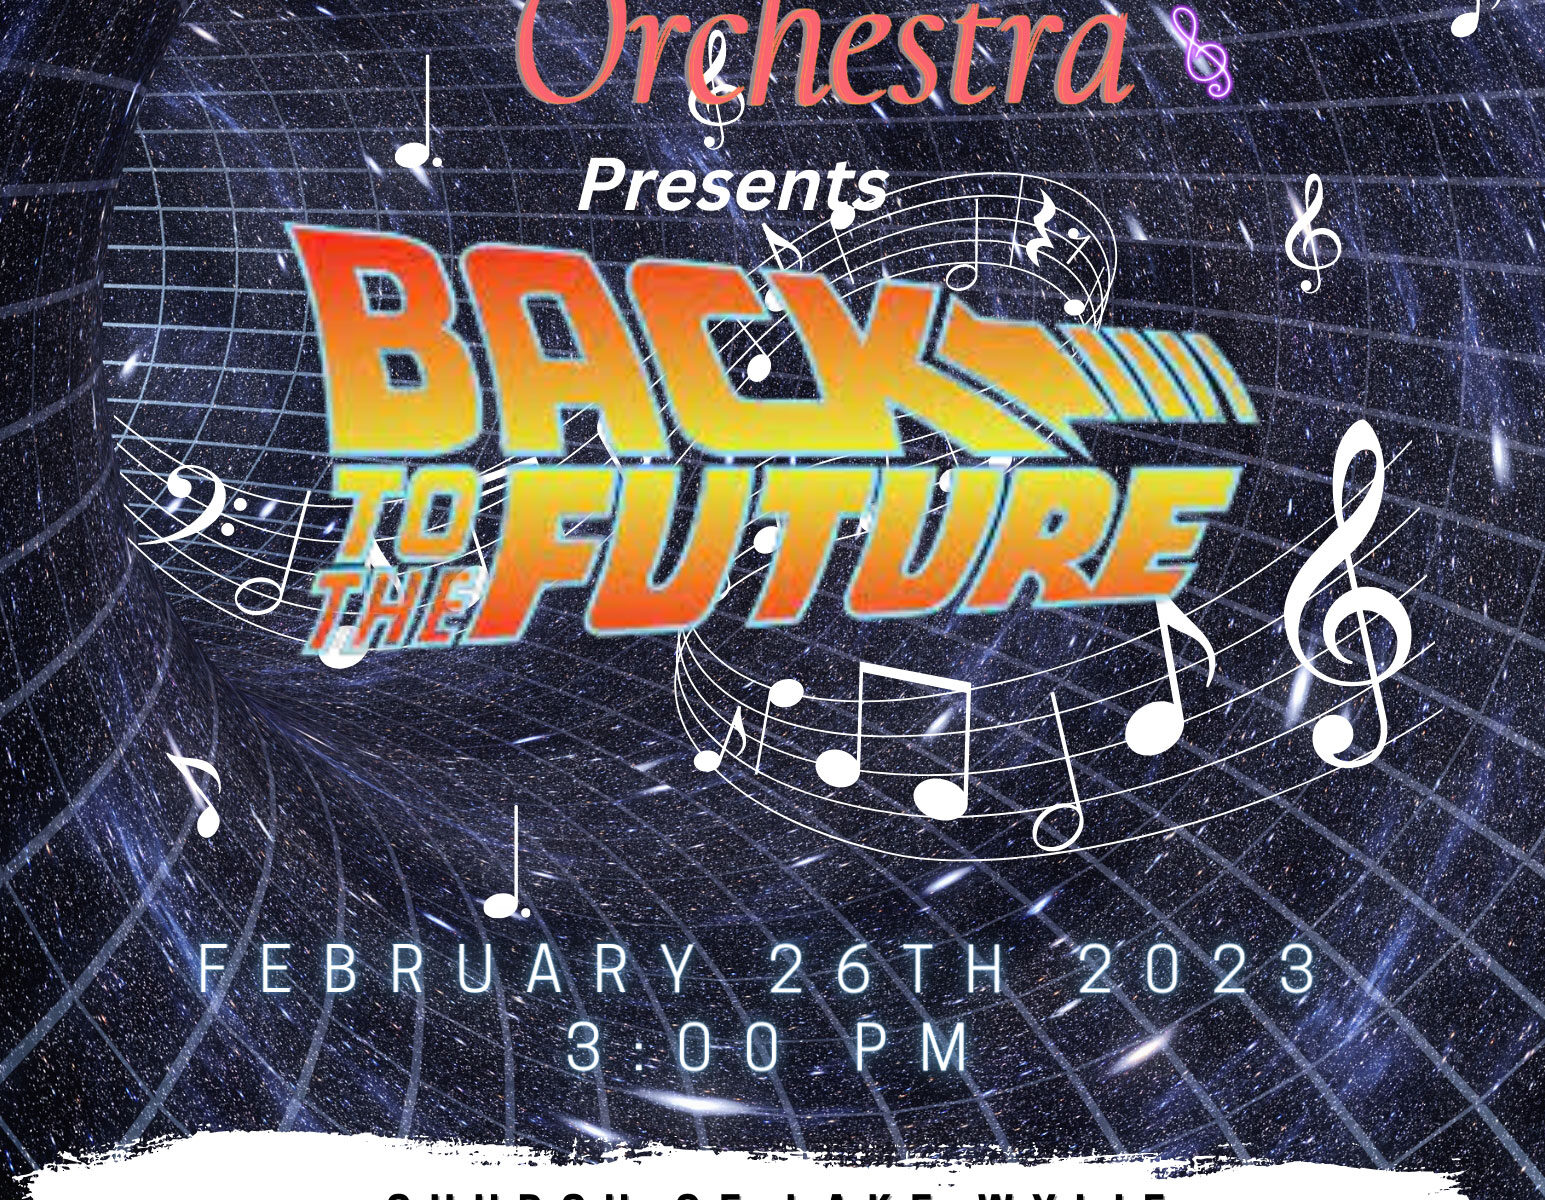 Back to the Future Concert Flyer